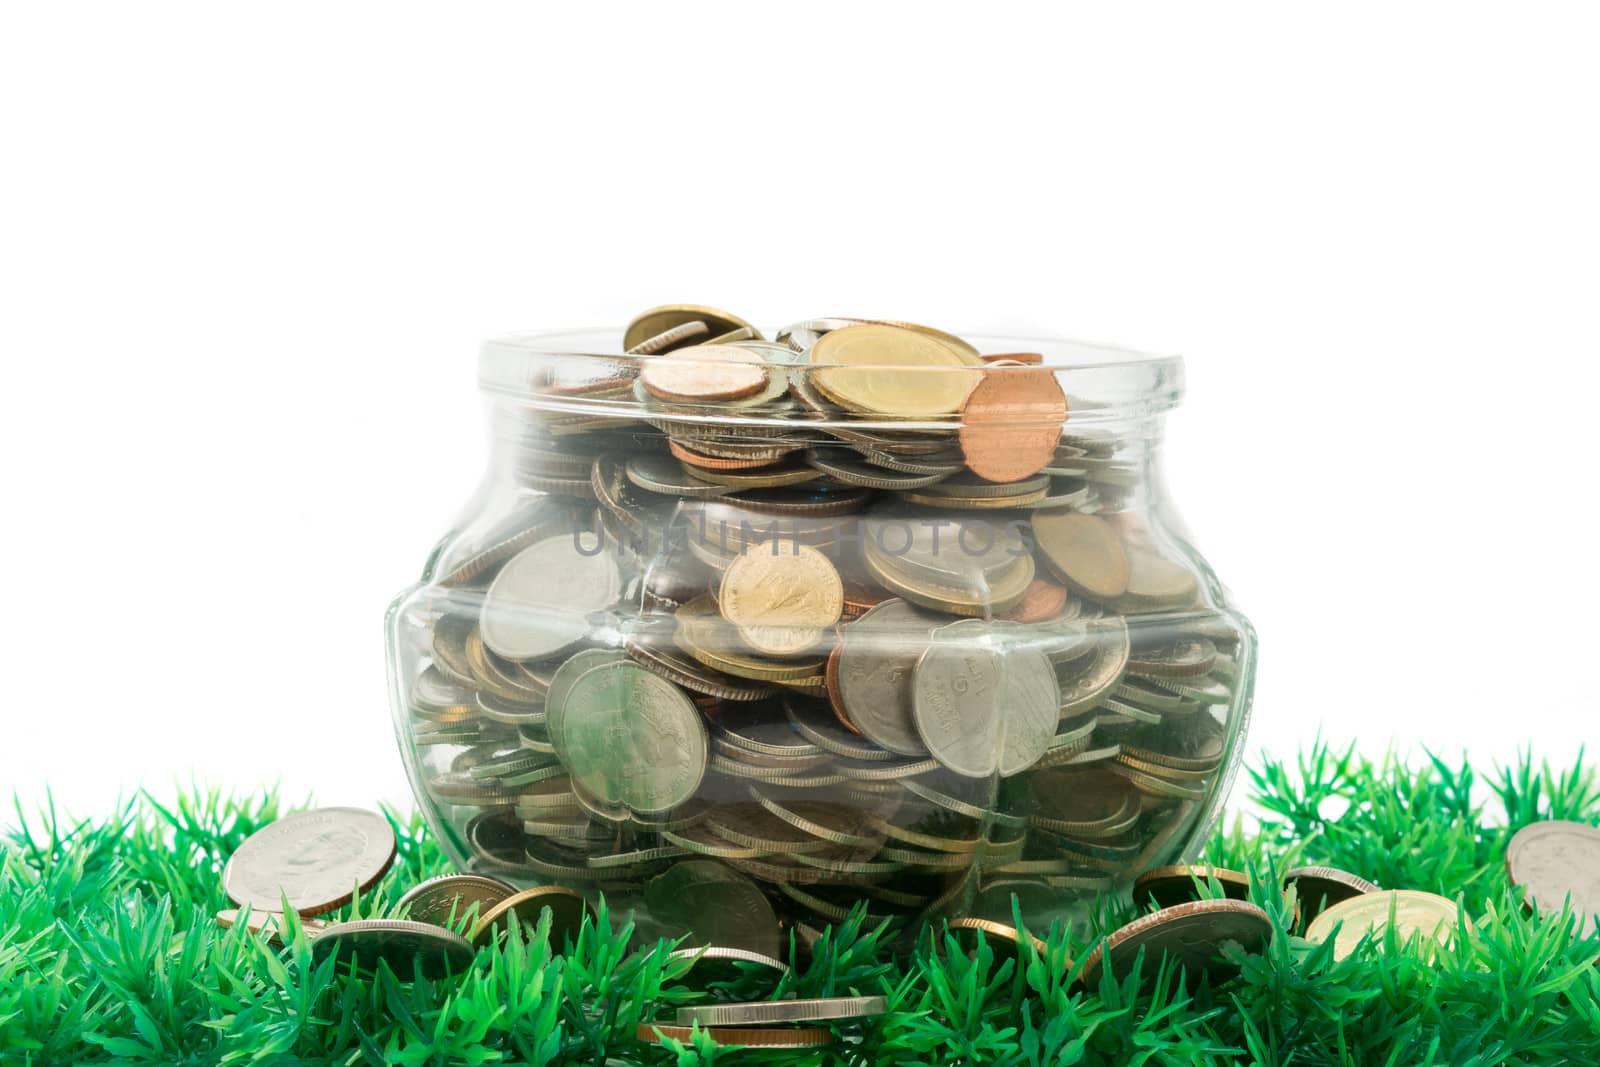 glass jar full of bath coins on artificial grass on white background